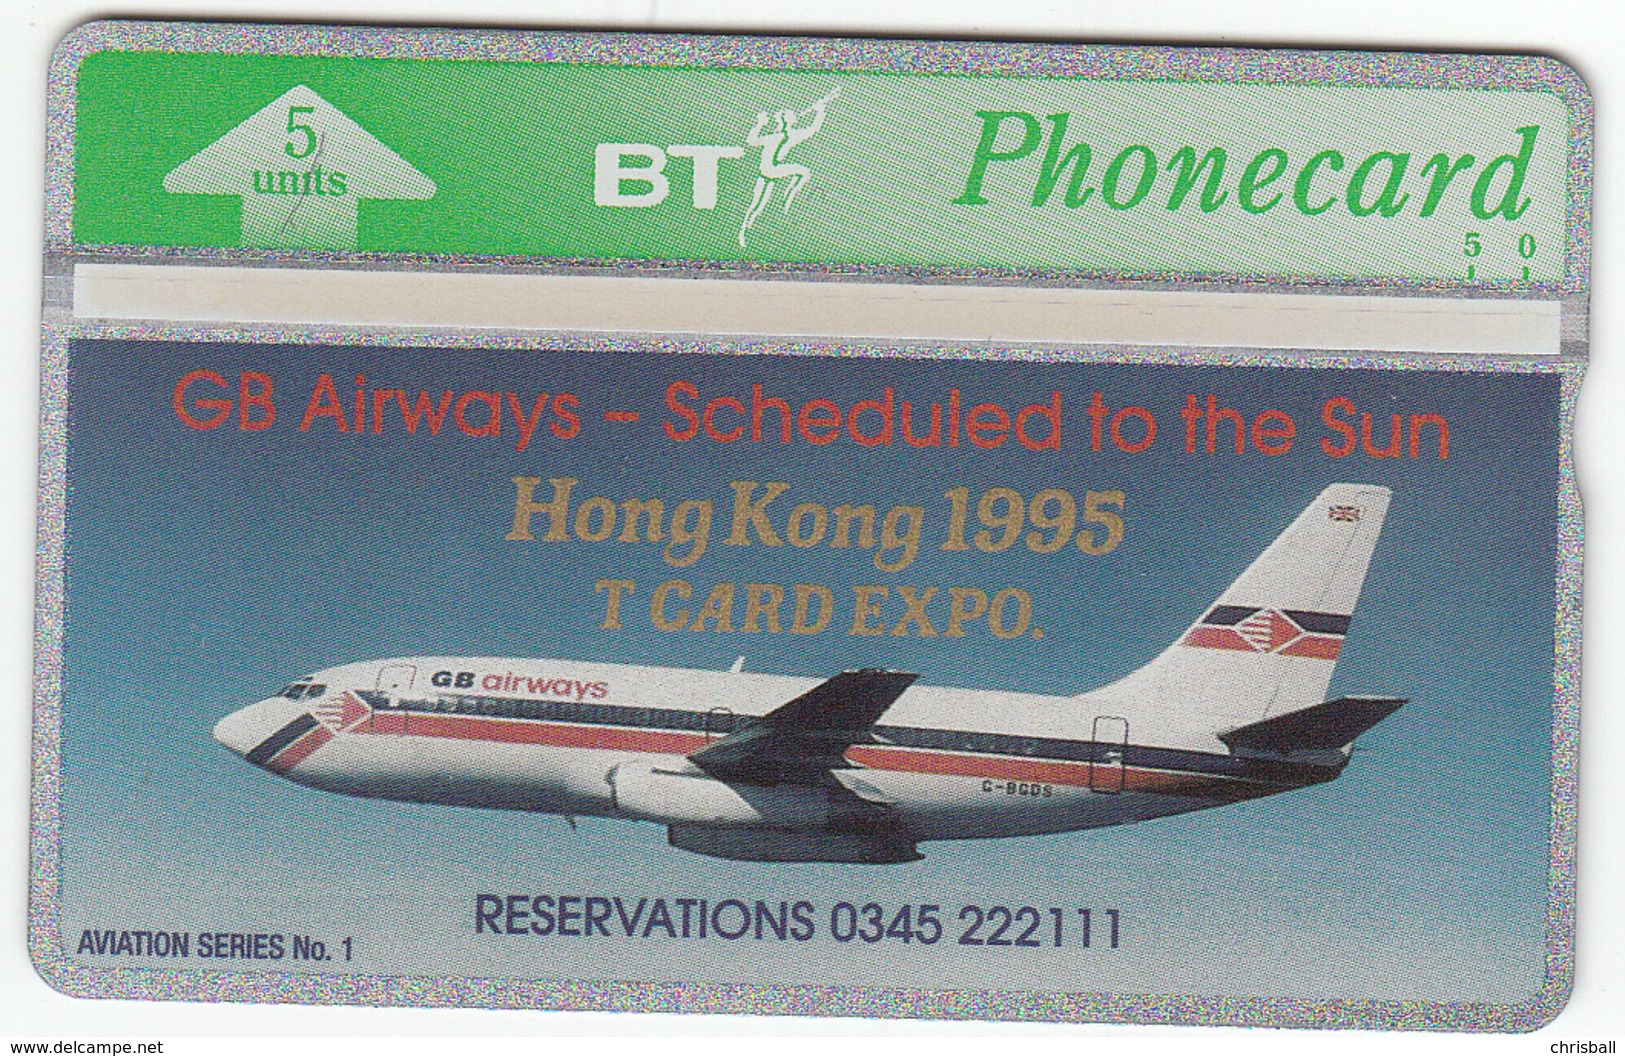 BT Phonecard Limited Edition 5unit GB Airways Hong Kong Overprint Mint - BT Thematic Civil Aircraft Issues